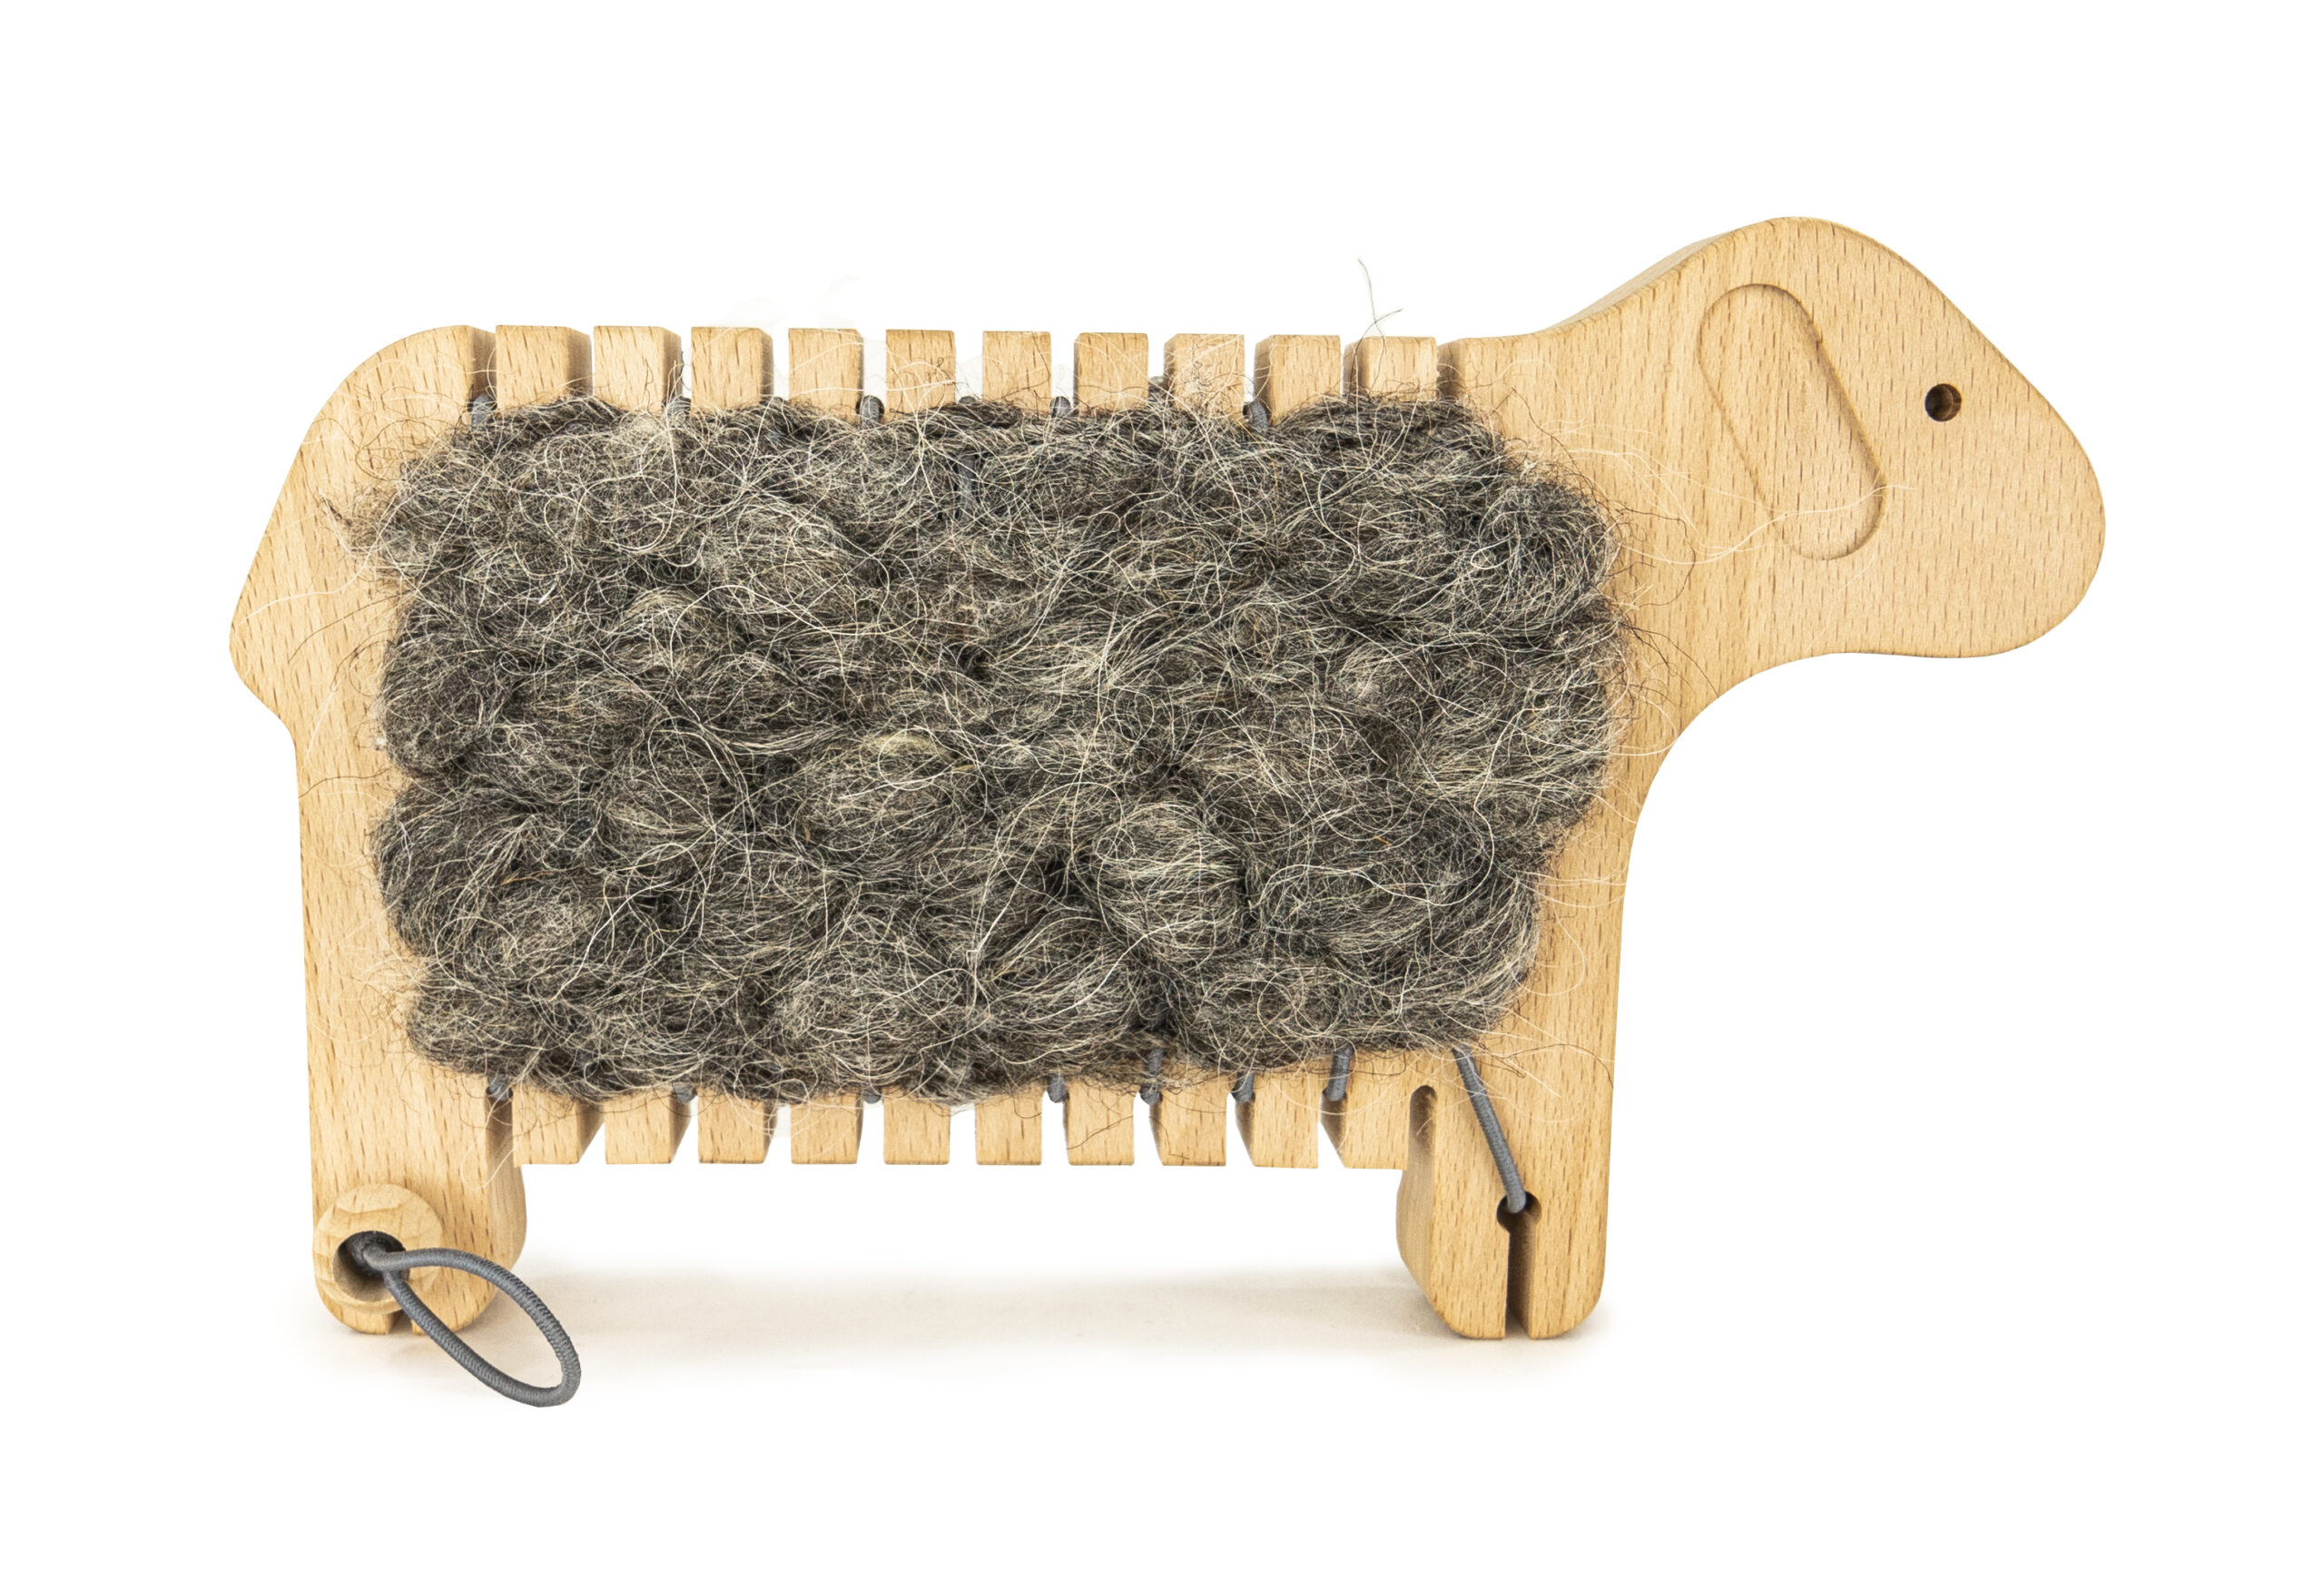 »WEAVING WITH A SHEEP« — BAJO